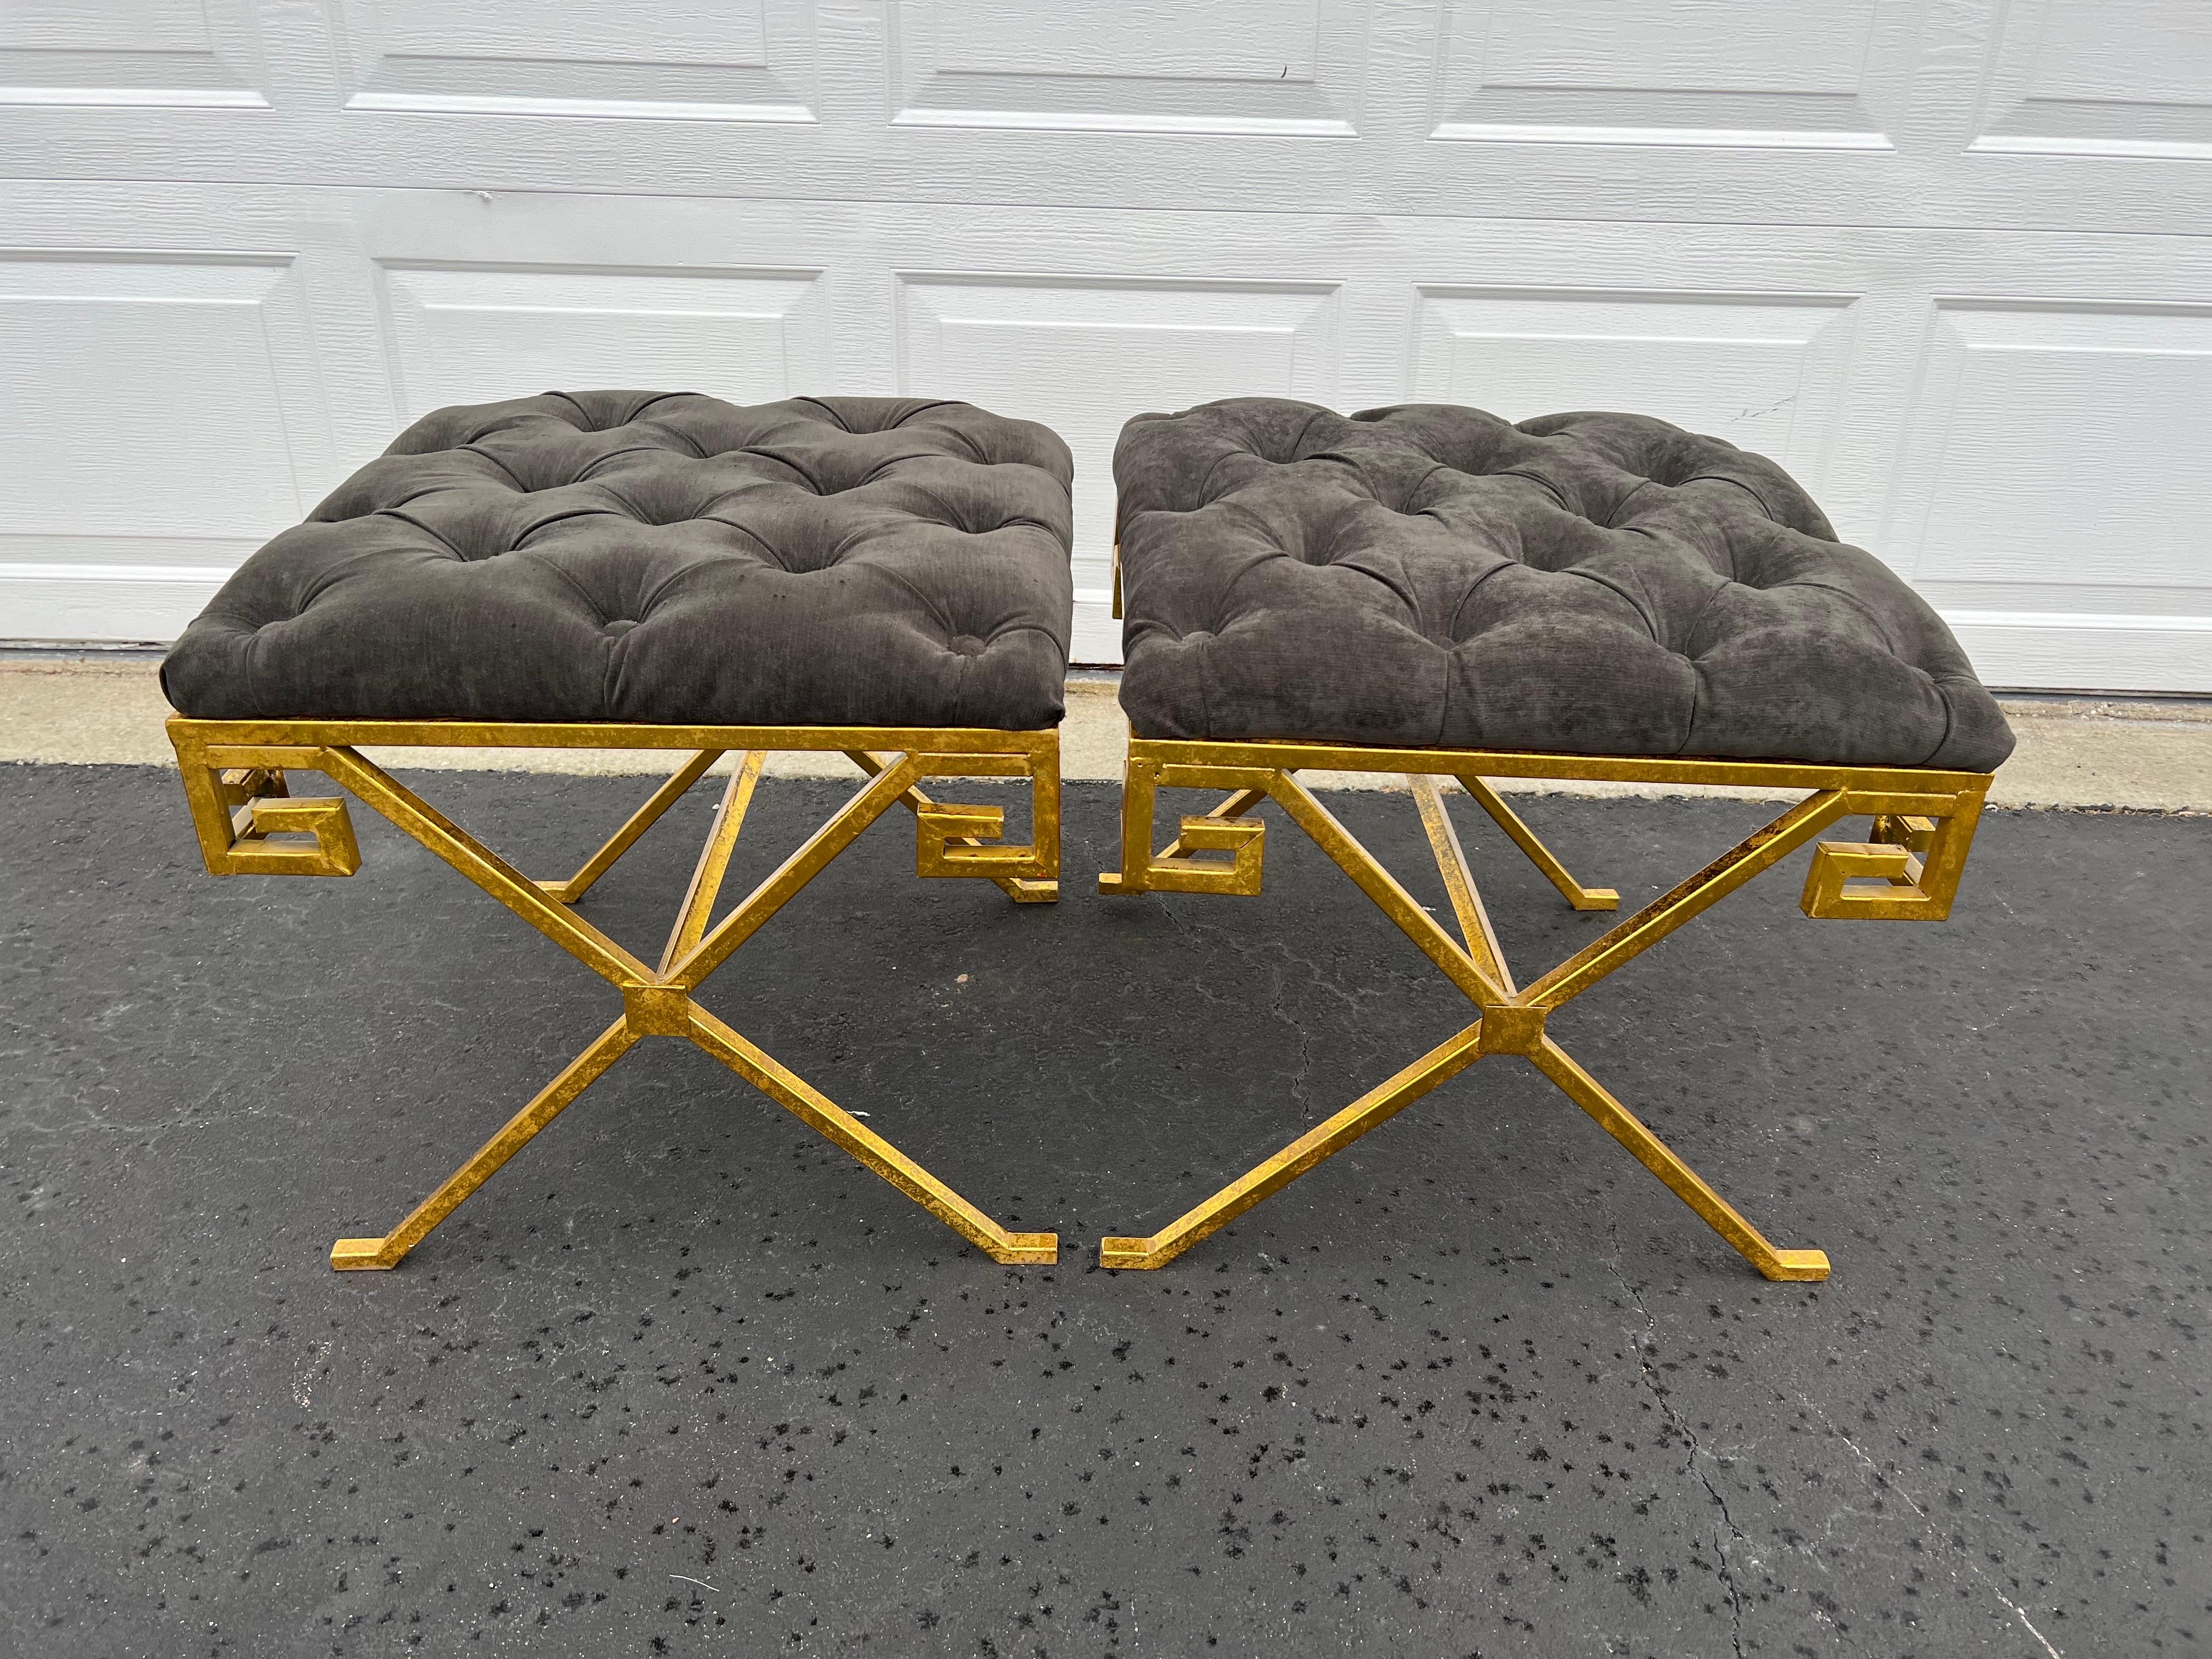 Pair of Greek key tufted gray velvet ottoman stools. These are new but have such a nice decorative appeal. Perfect for at the foot of a bed or under a console. One foot has a padded support as it is a bit shorter than the other legs.